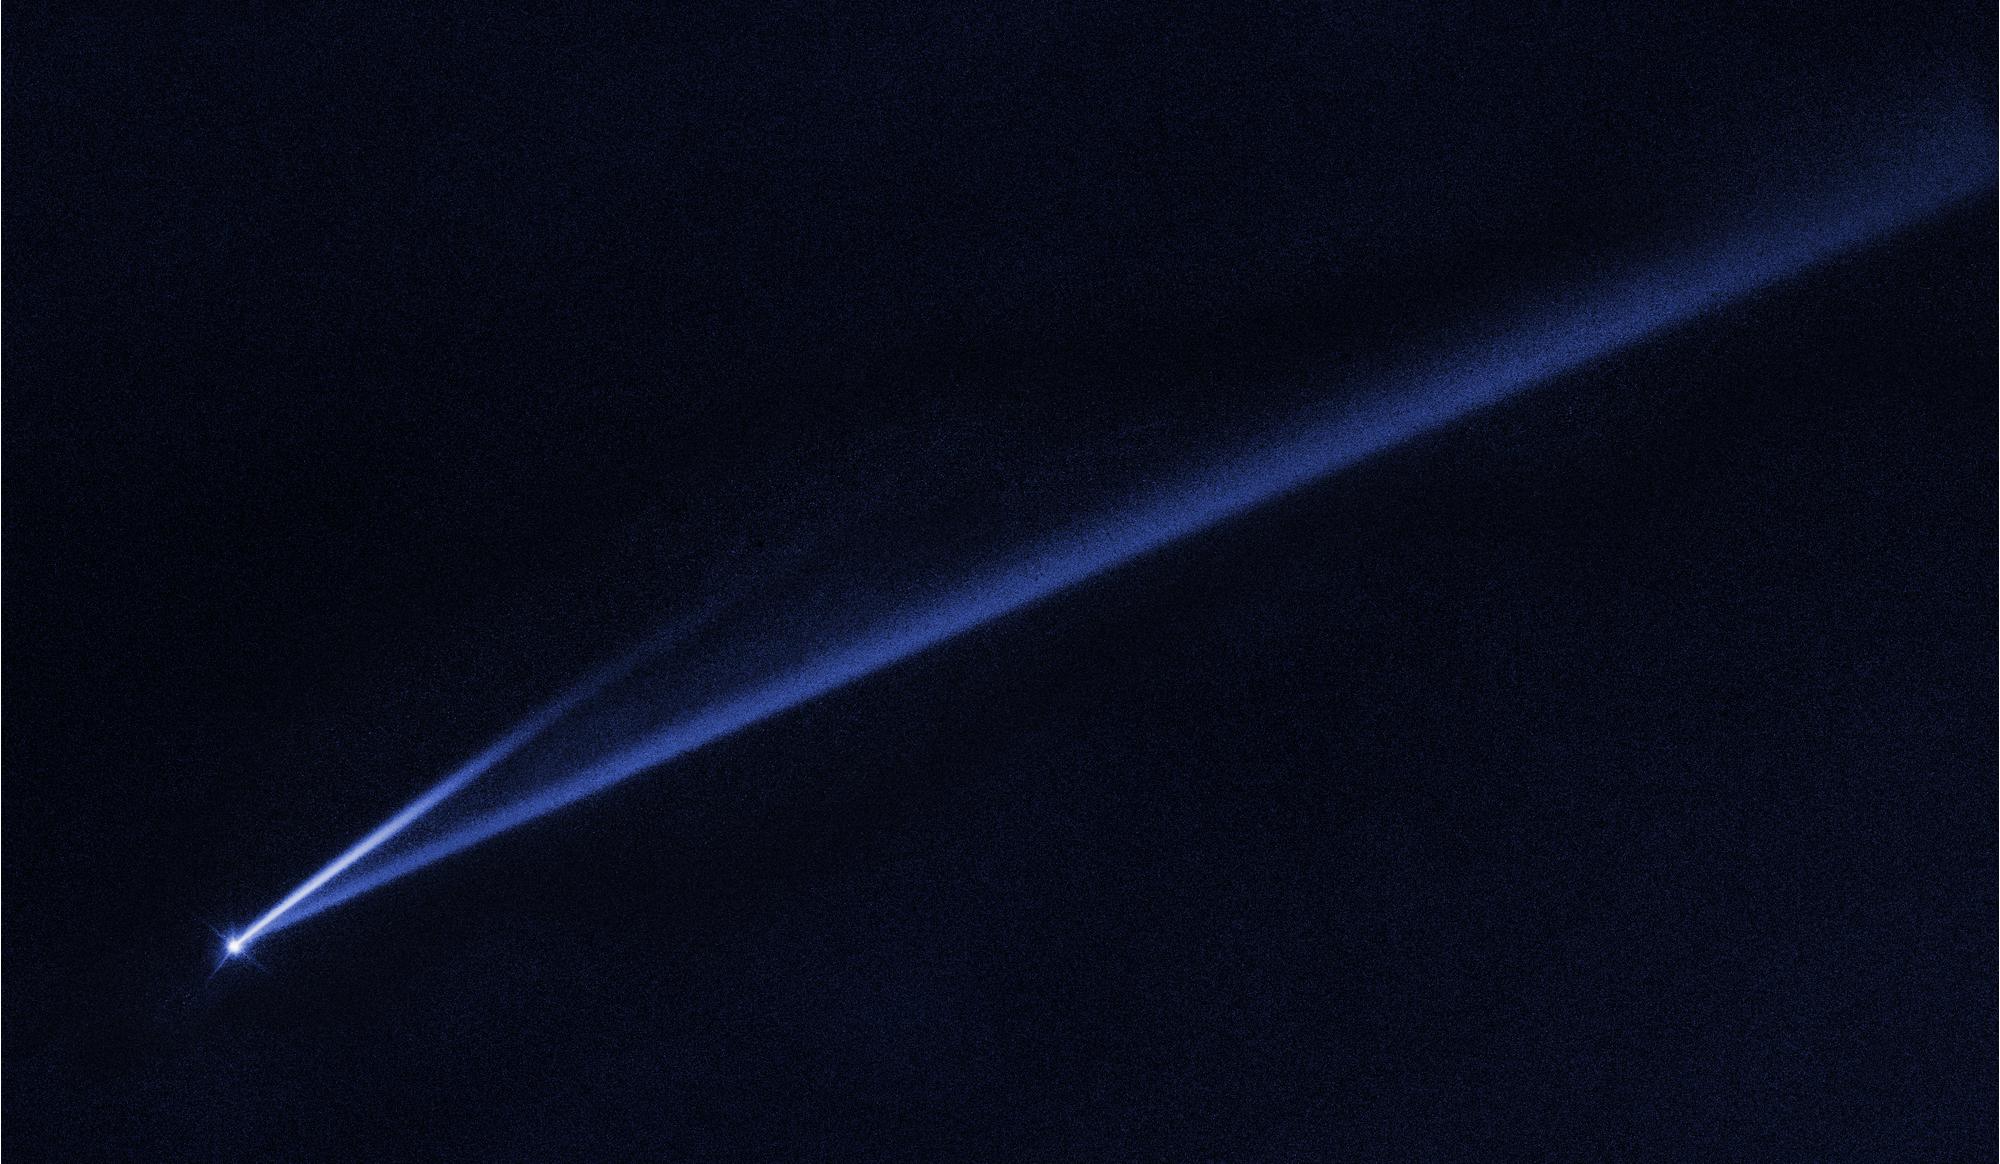 Hubble image of asteroid (6478) Gault